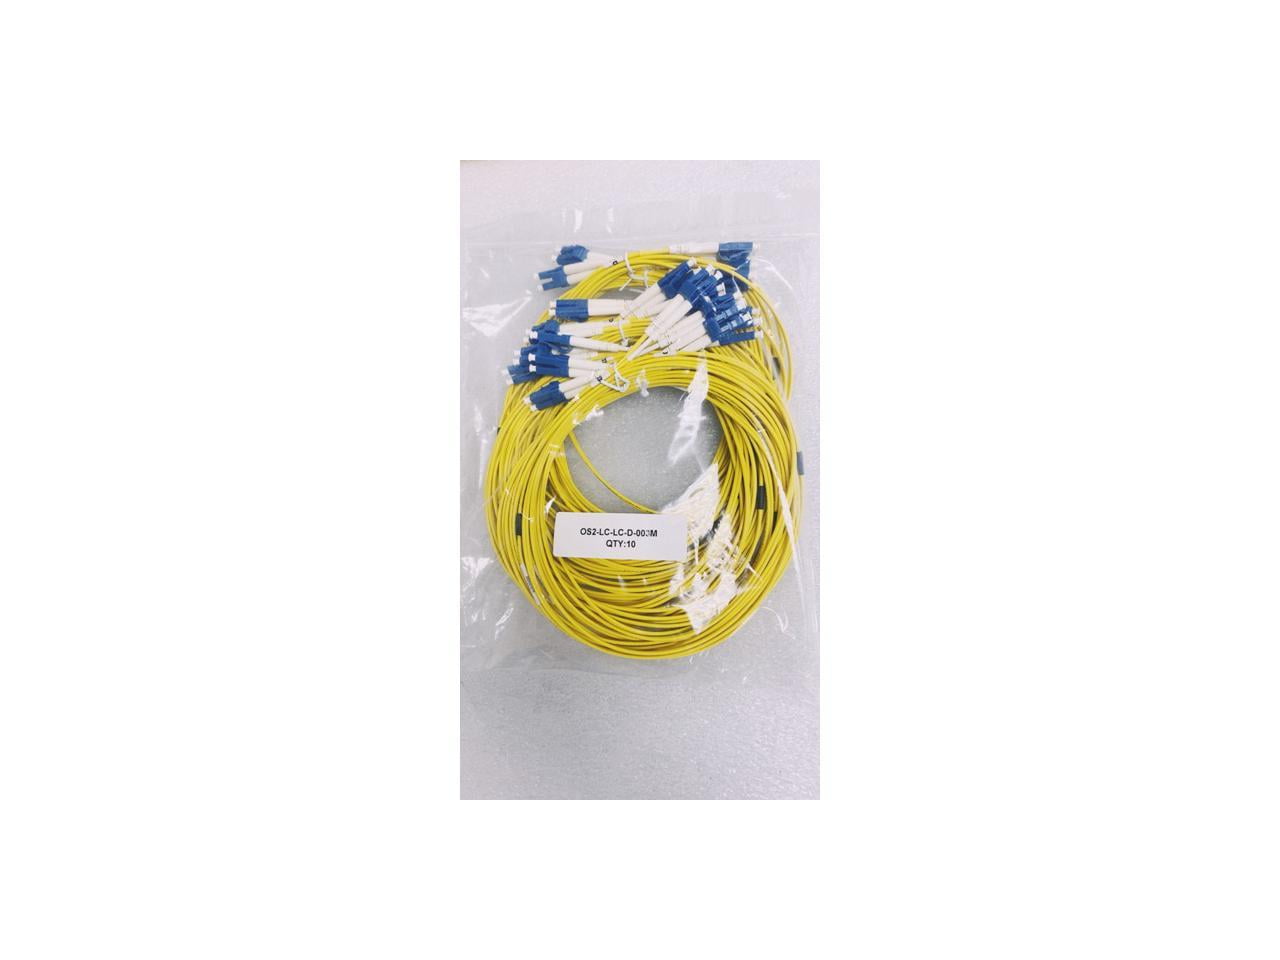 Duplex 9/125 LC to LC Singlemode Jumper 2 Meter 6.56ft | Length Options: 0.5M-300M 1g 10g sfp 10gbase lc/lc dx Yellow Zip-Cord PVC ofnr lc-lc 2M OS2 LC LC Fiber Patch Cable FiberCablesDirect 